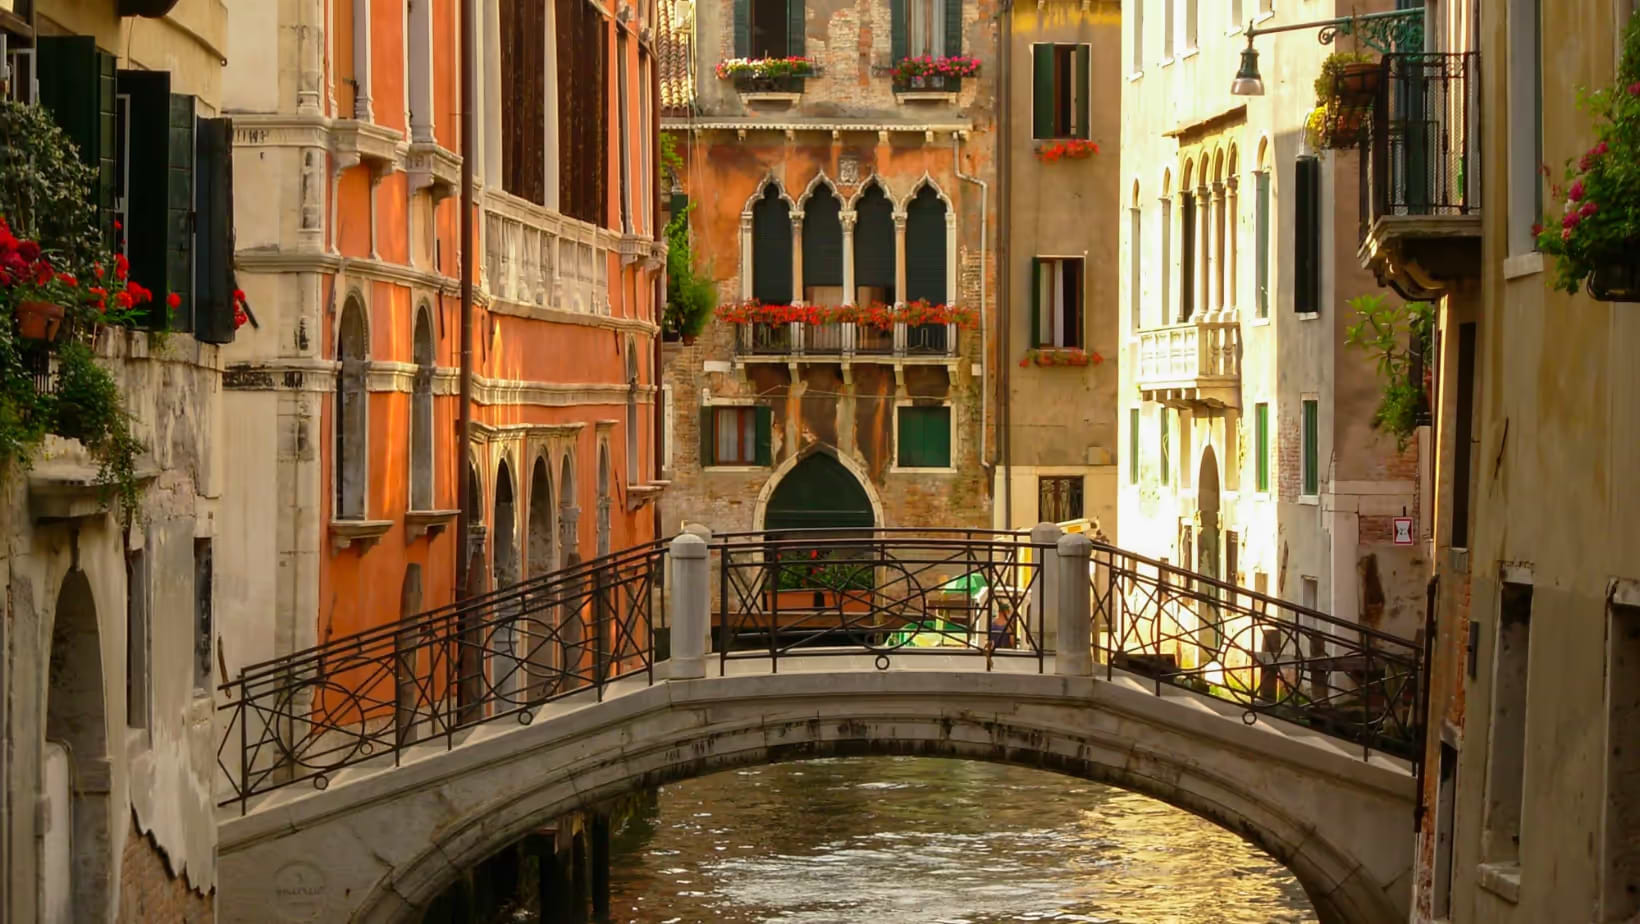 View of Venice with bridge and colorful buildings